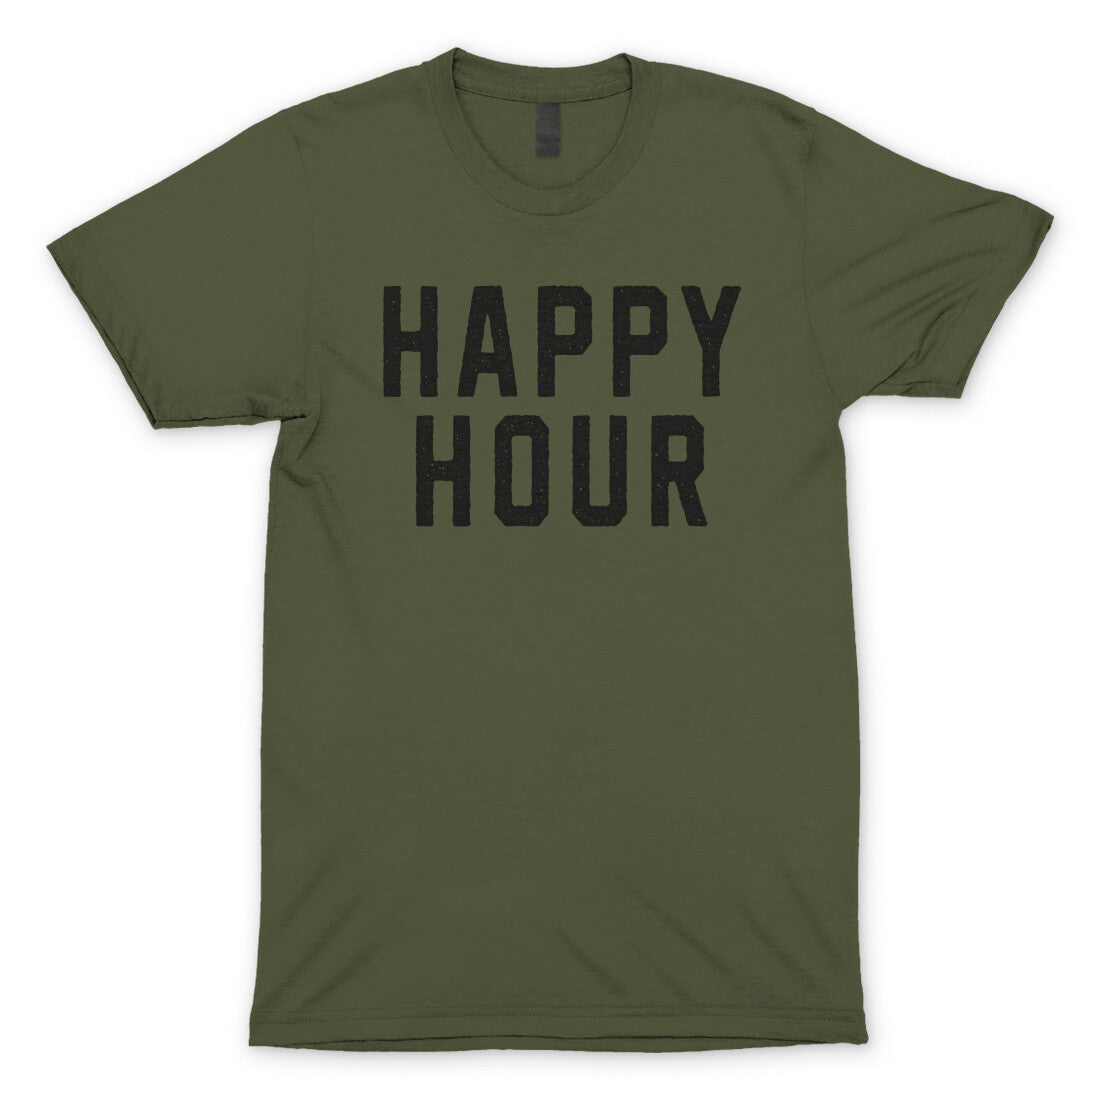 Happy Hour in Military Green Color